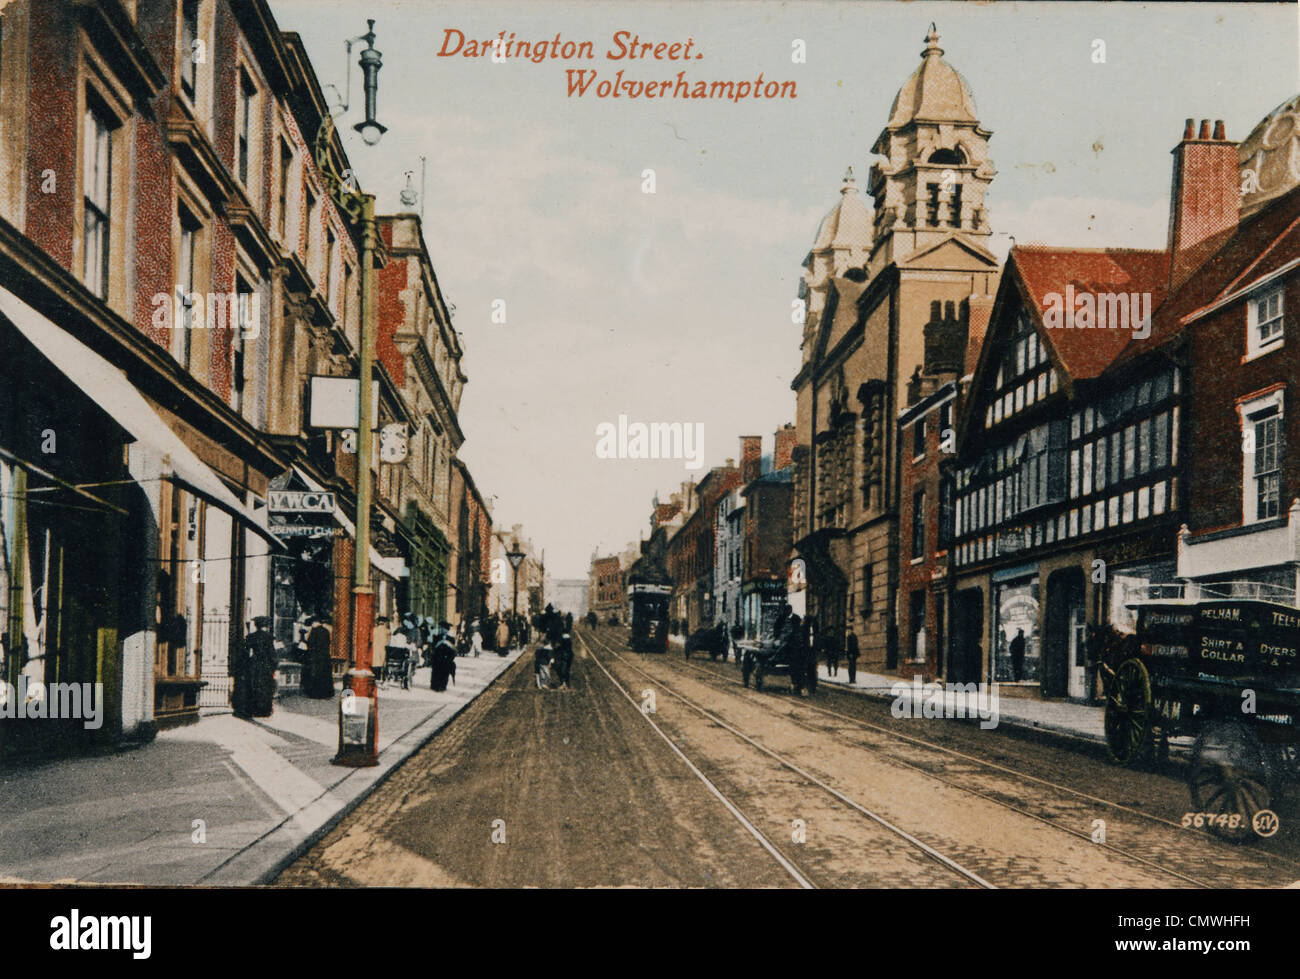 Darlington Street, Wolverhampton, circa 1910. A black and white photograph touched up in colour, of Darlington Street. To the Stock Photo